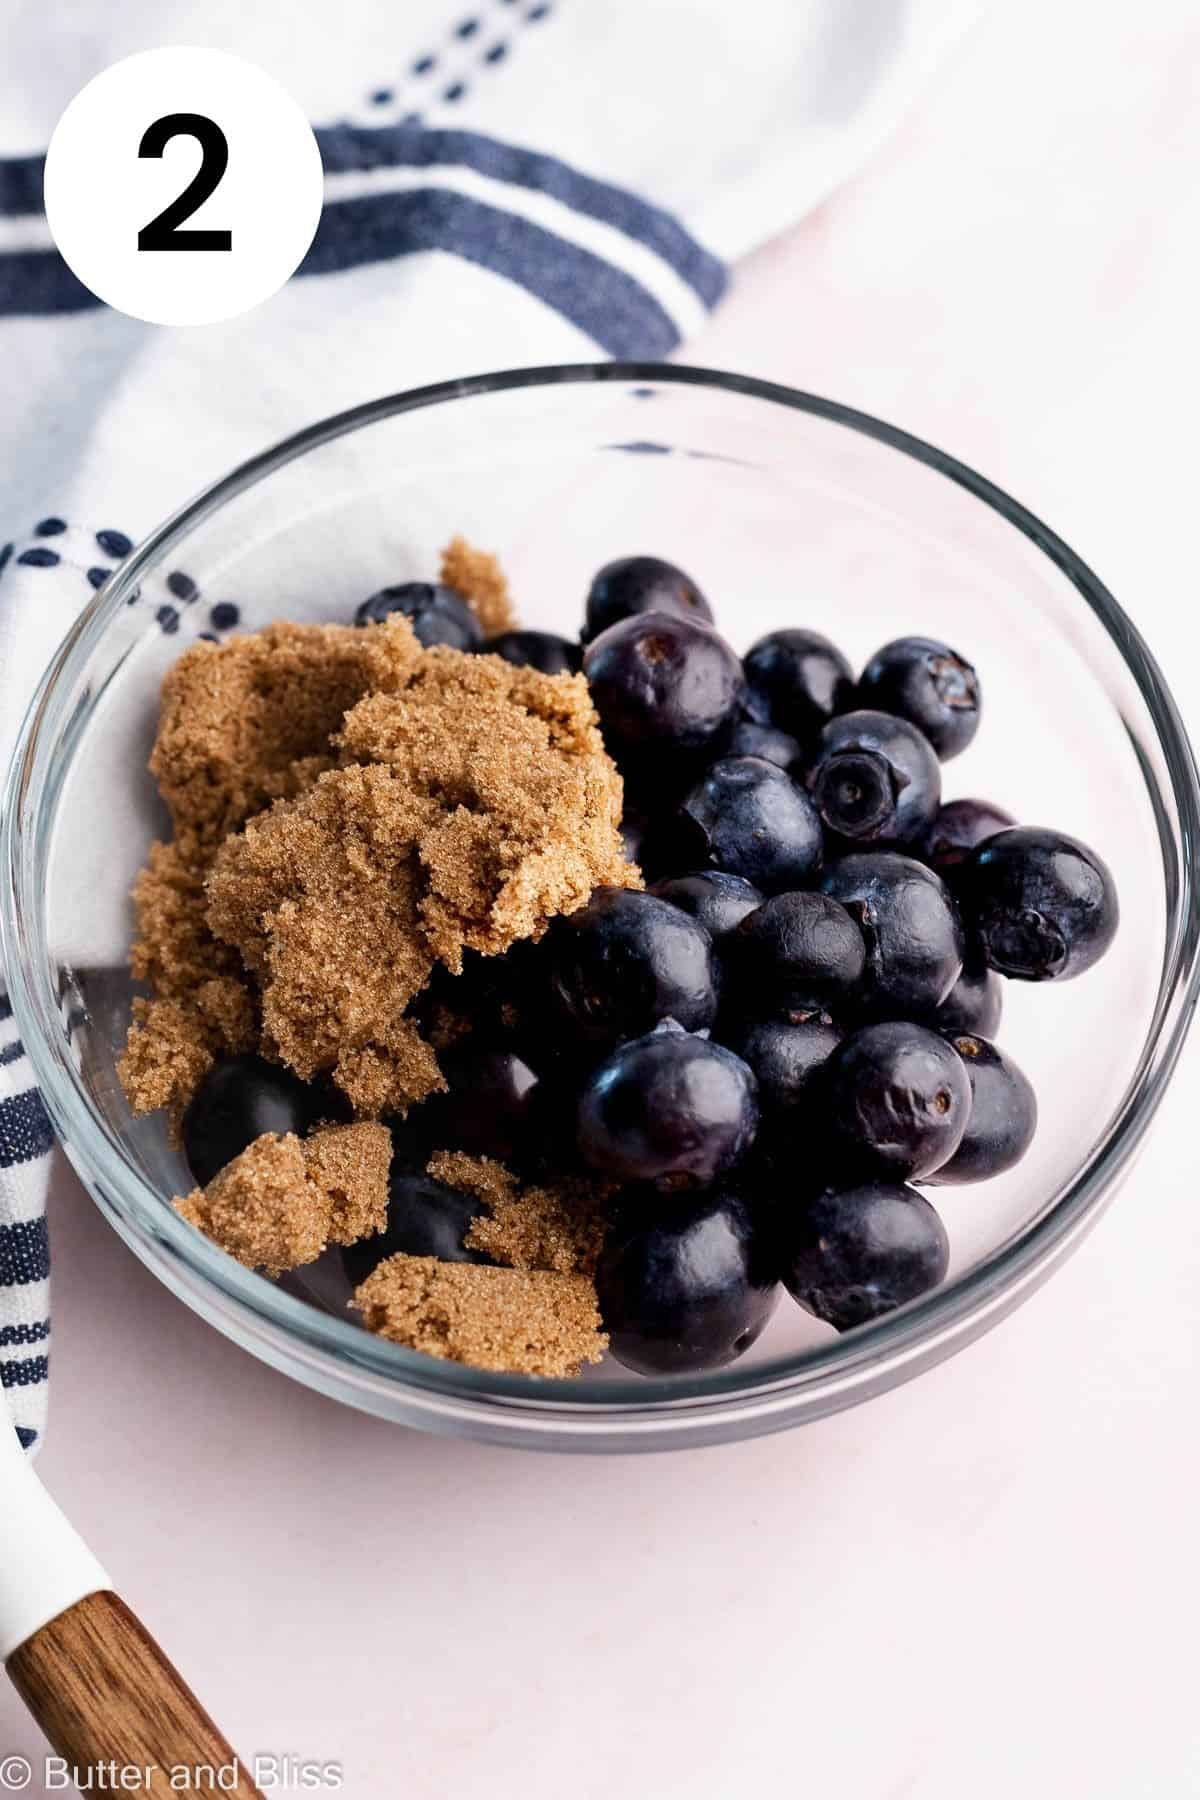 Pretty bowl of blueberries sprinkled with brown sugar.